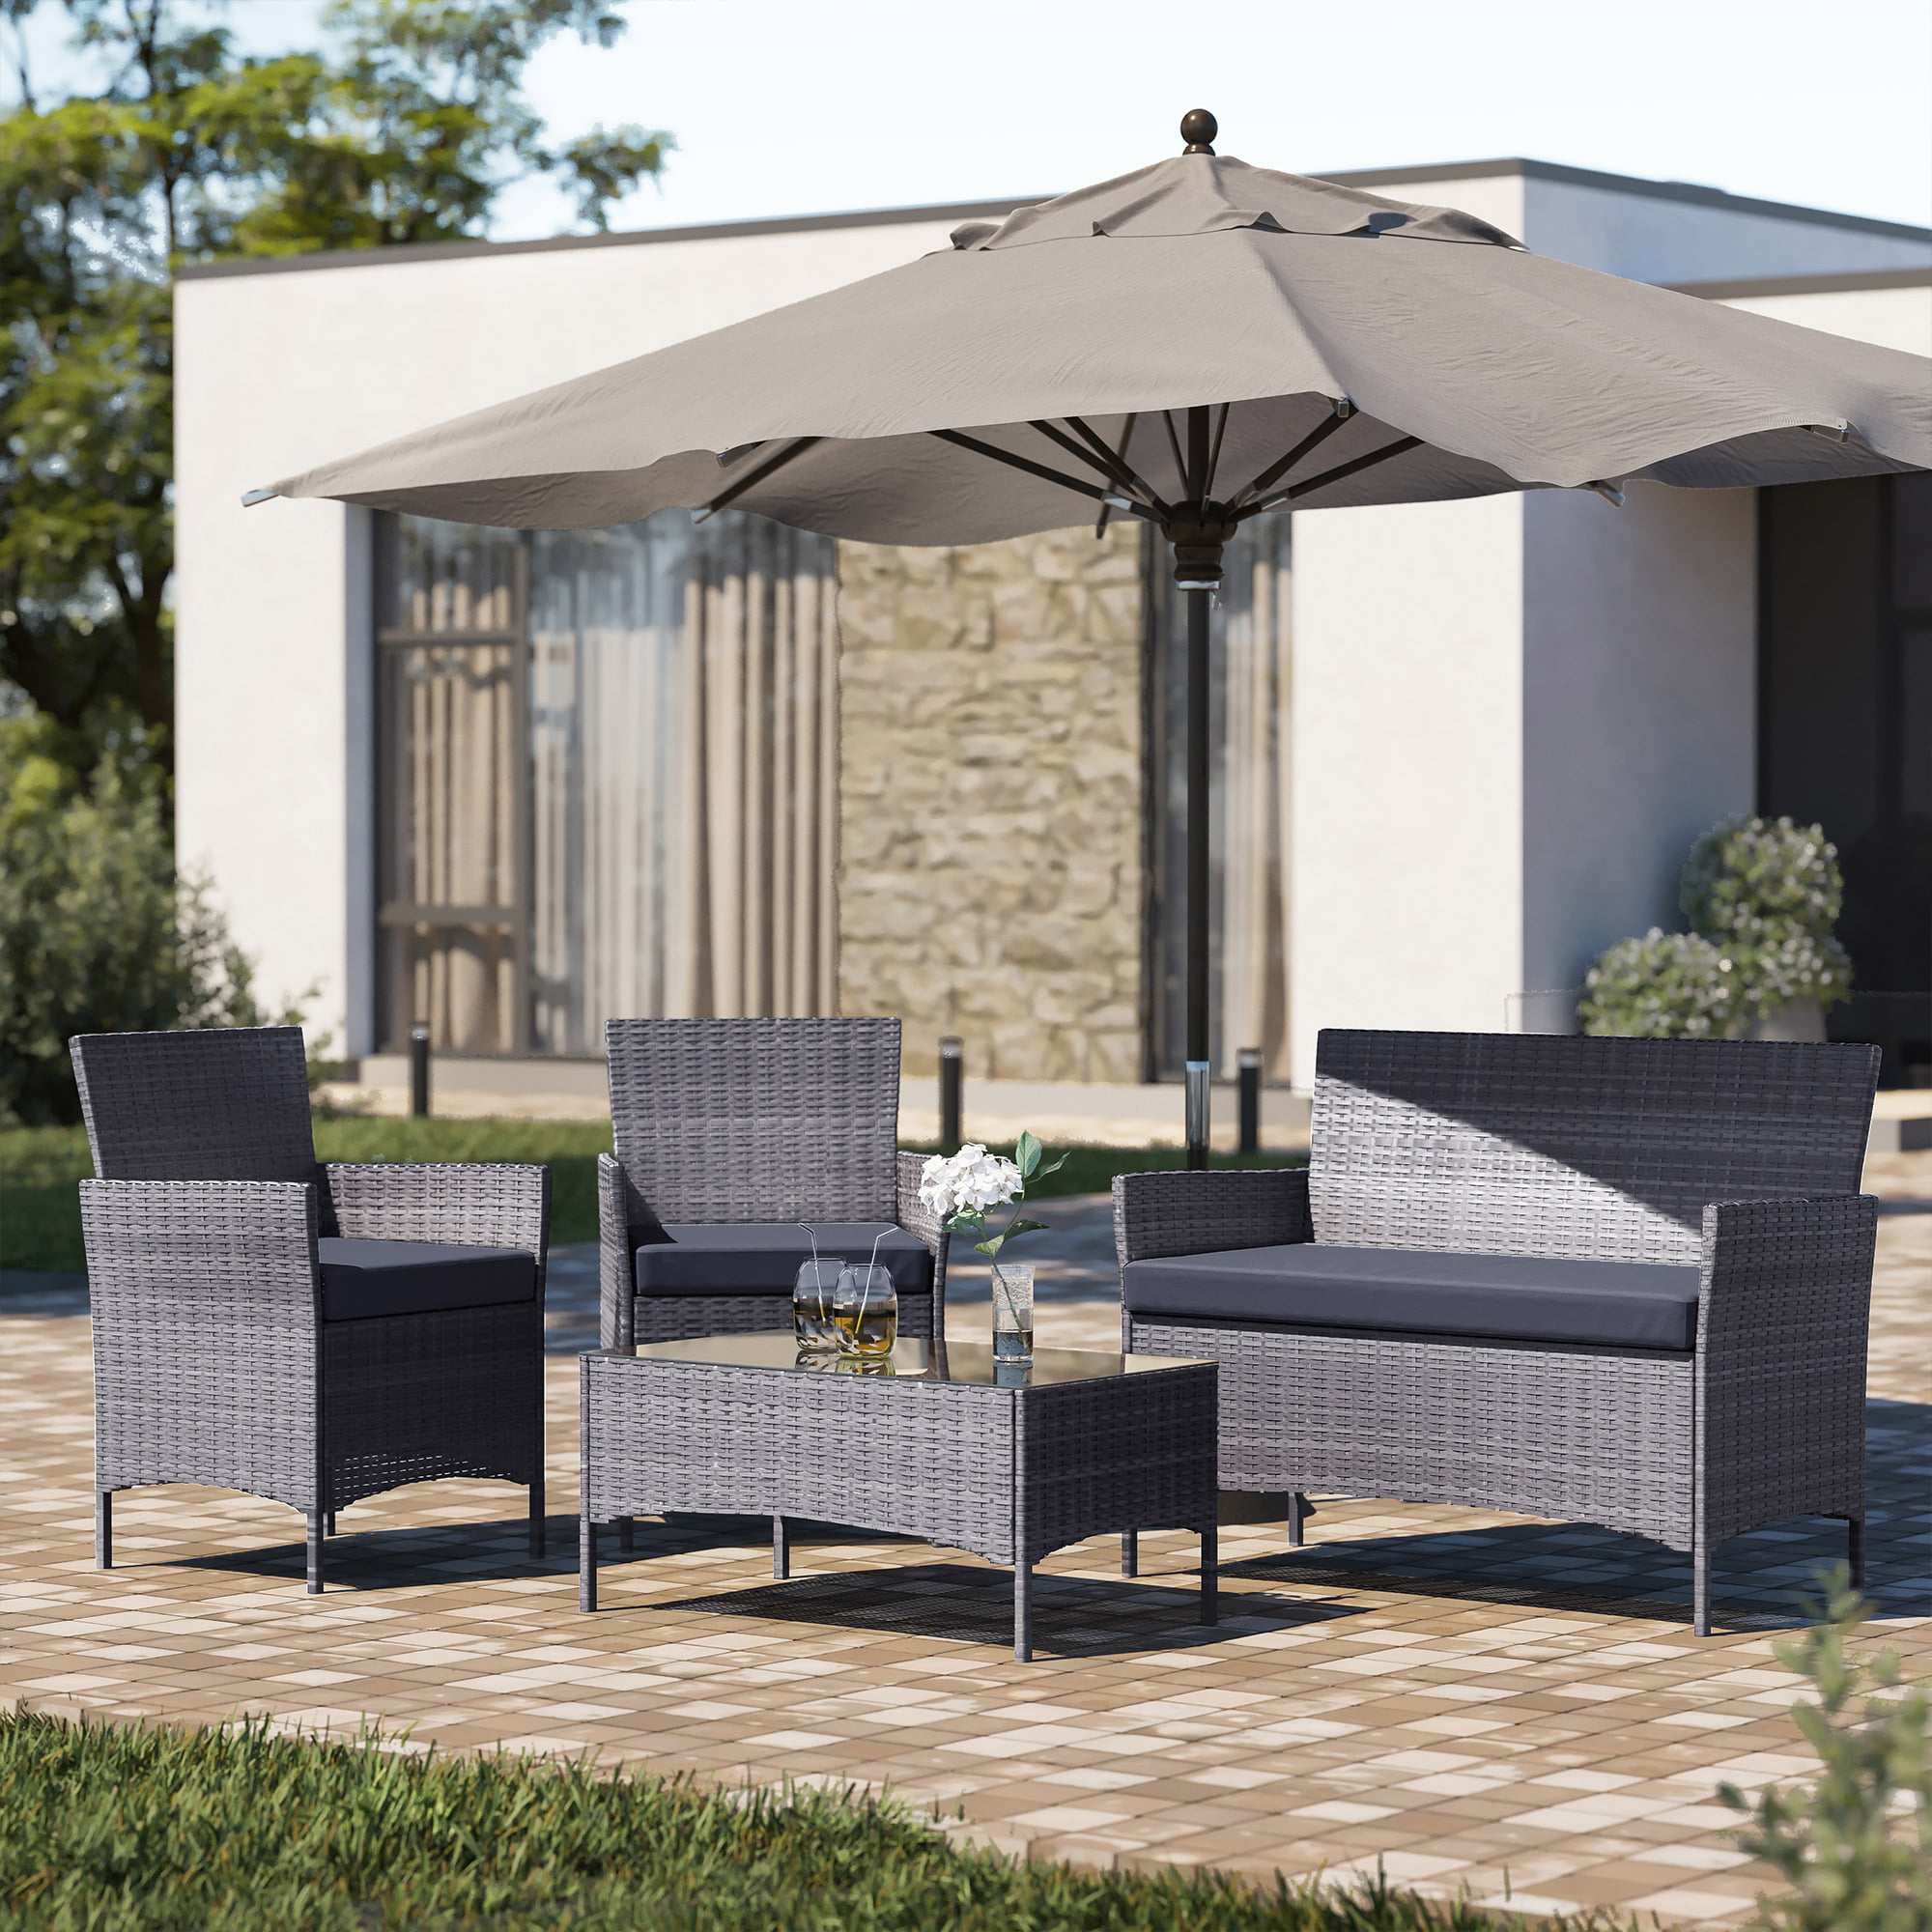 BELLEZE 4 PC Furniture Outdoor Set 4 Piece Rattan Outdoor Patio Set One Glass Table One Sofa Two Chairs Grey